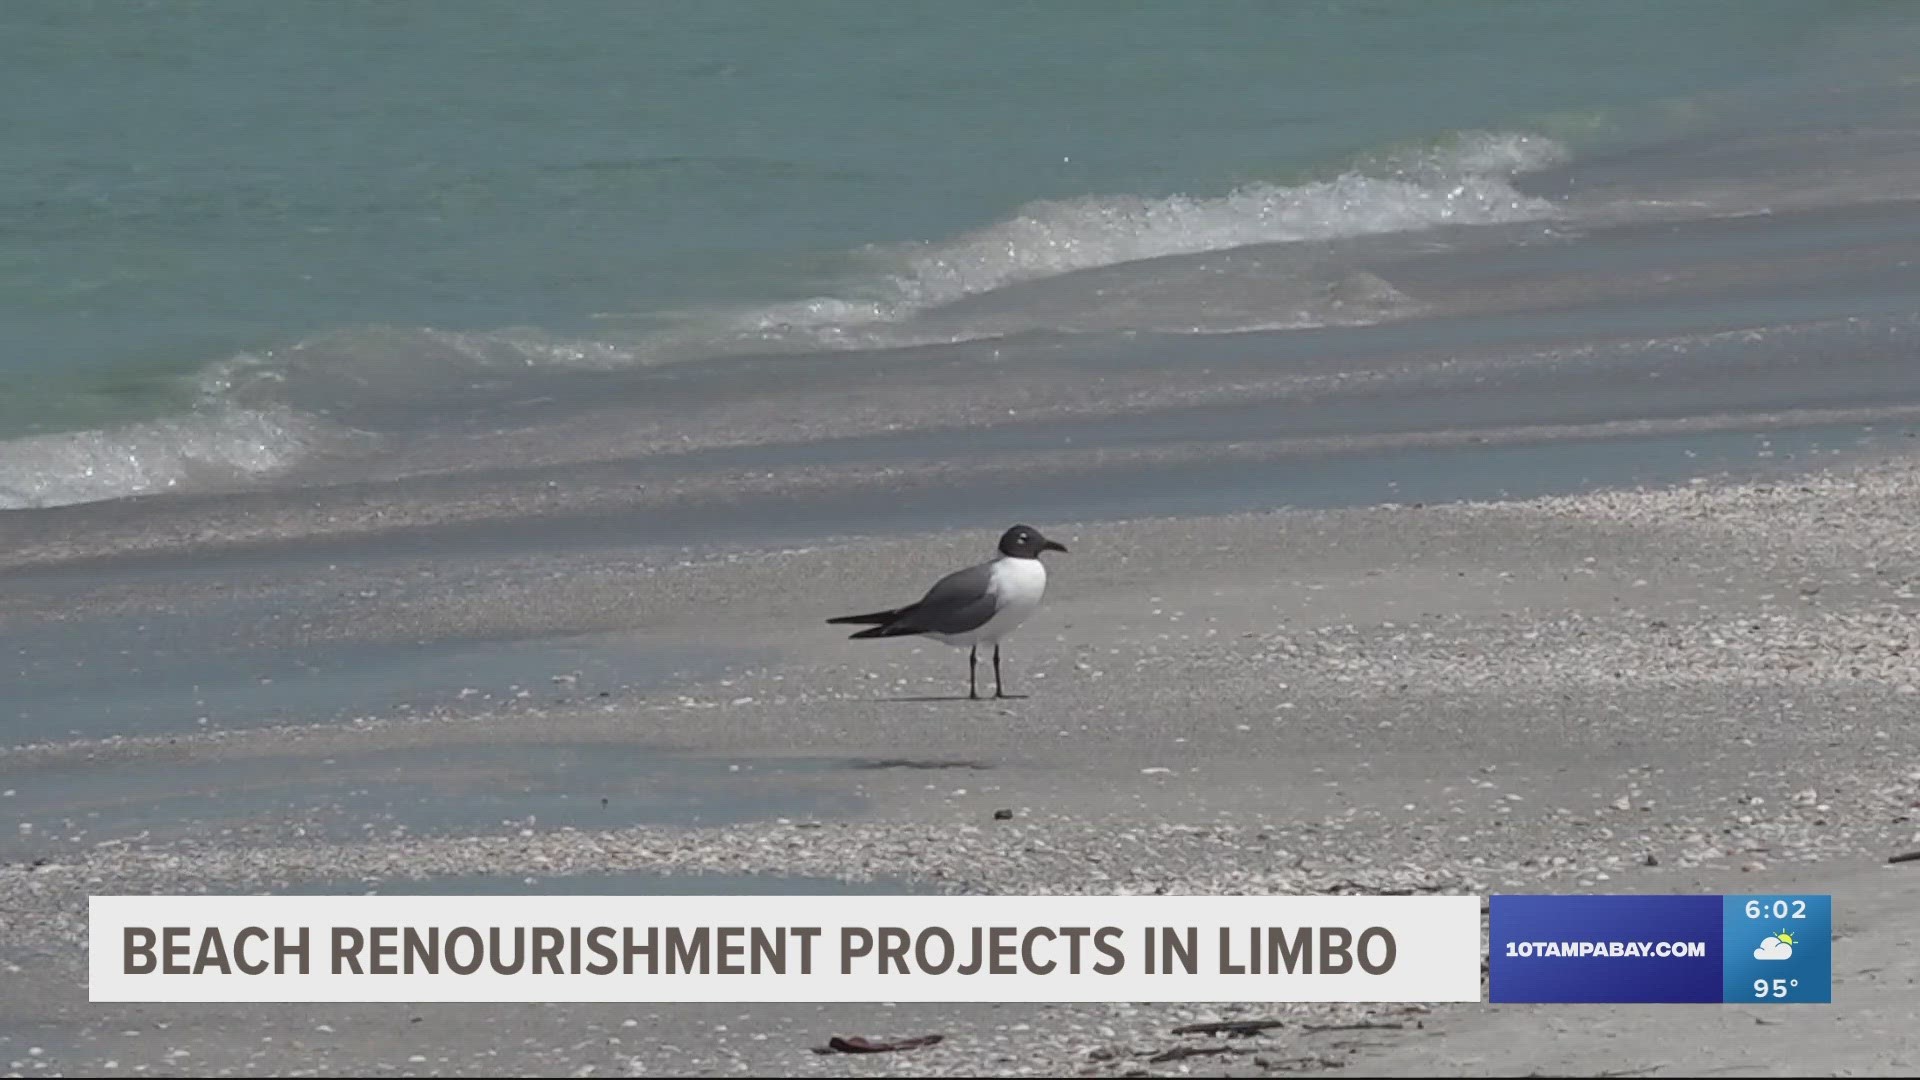 With some project years past due, Rep. Luna is reaching out, once again, to the Army Corps of Engineers to get beach renourishment projects back on track.